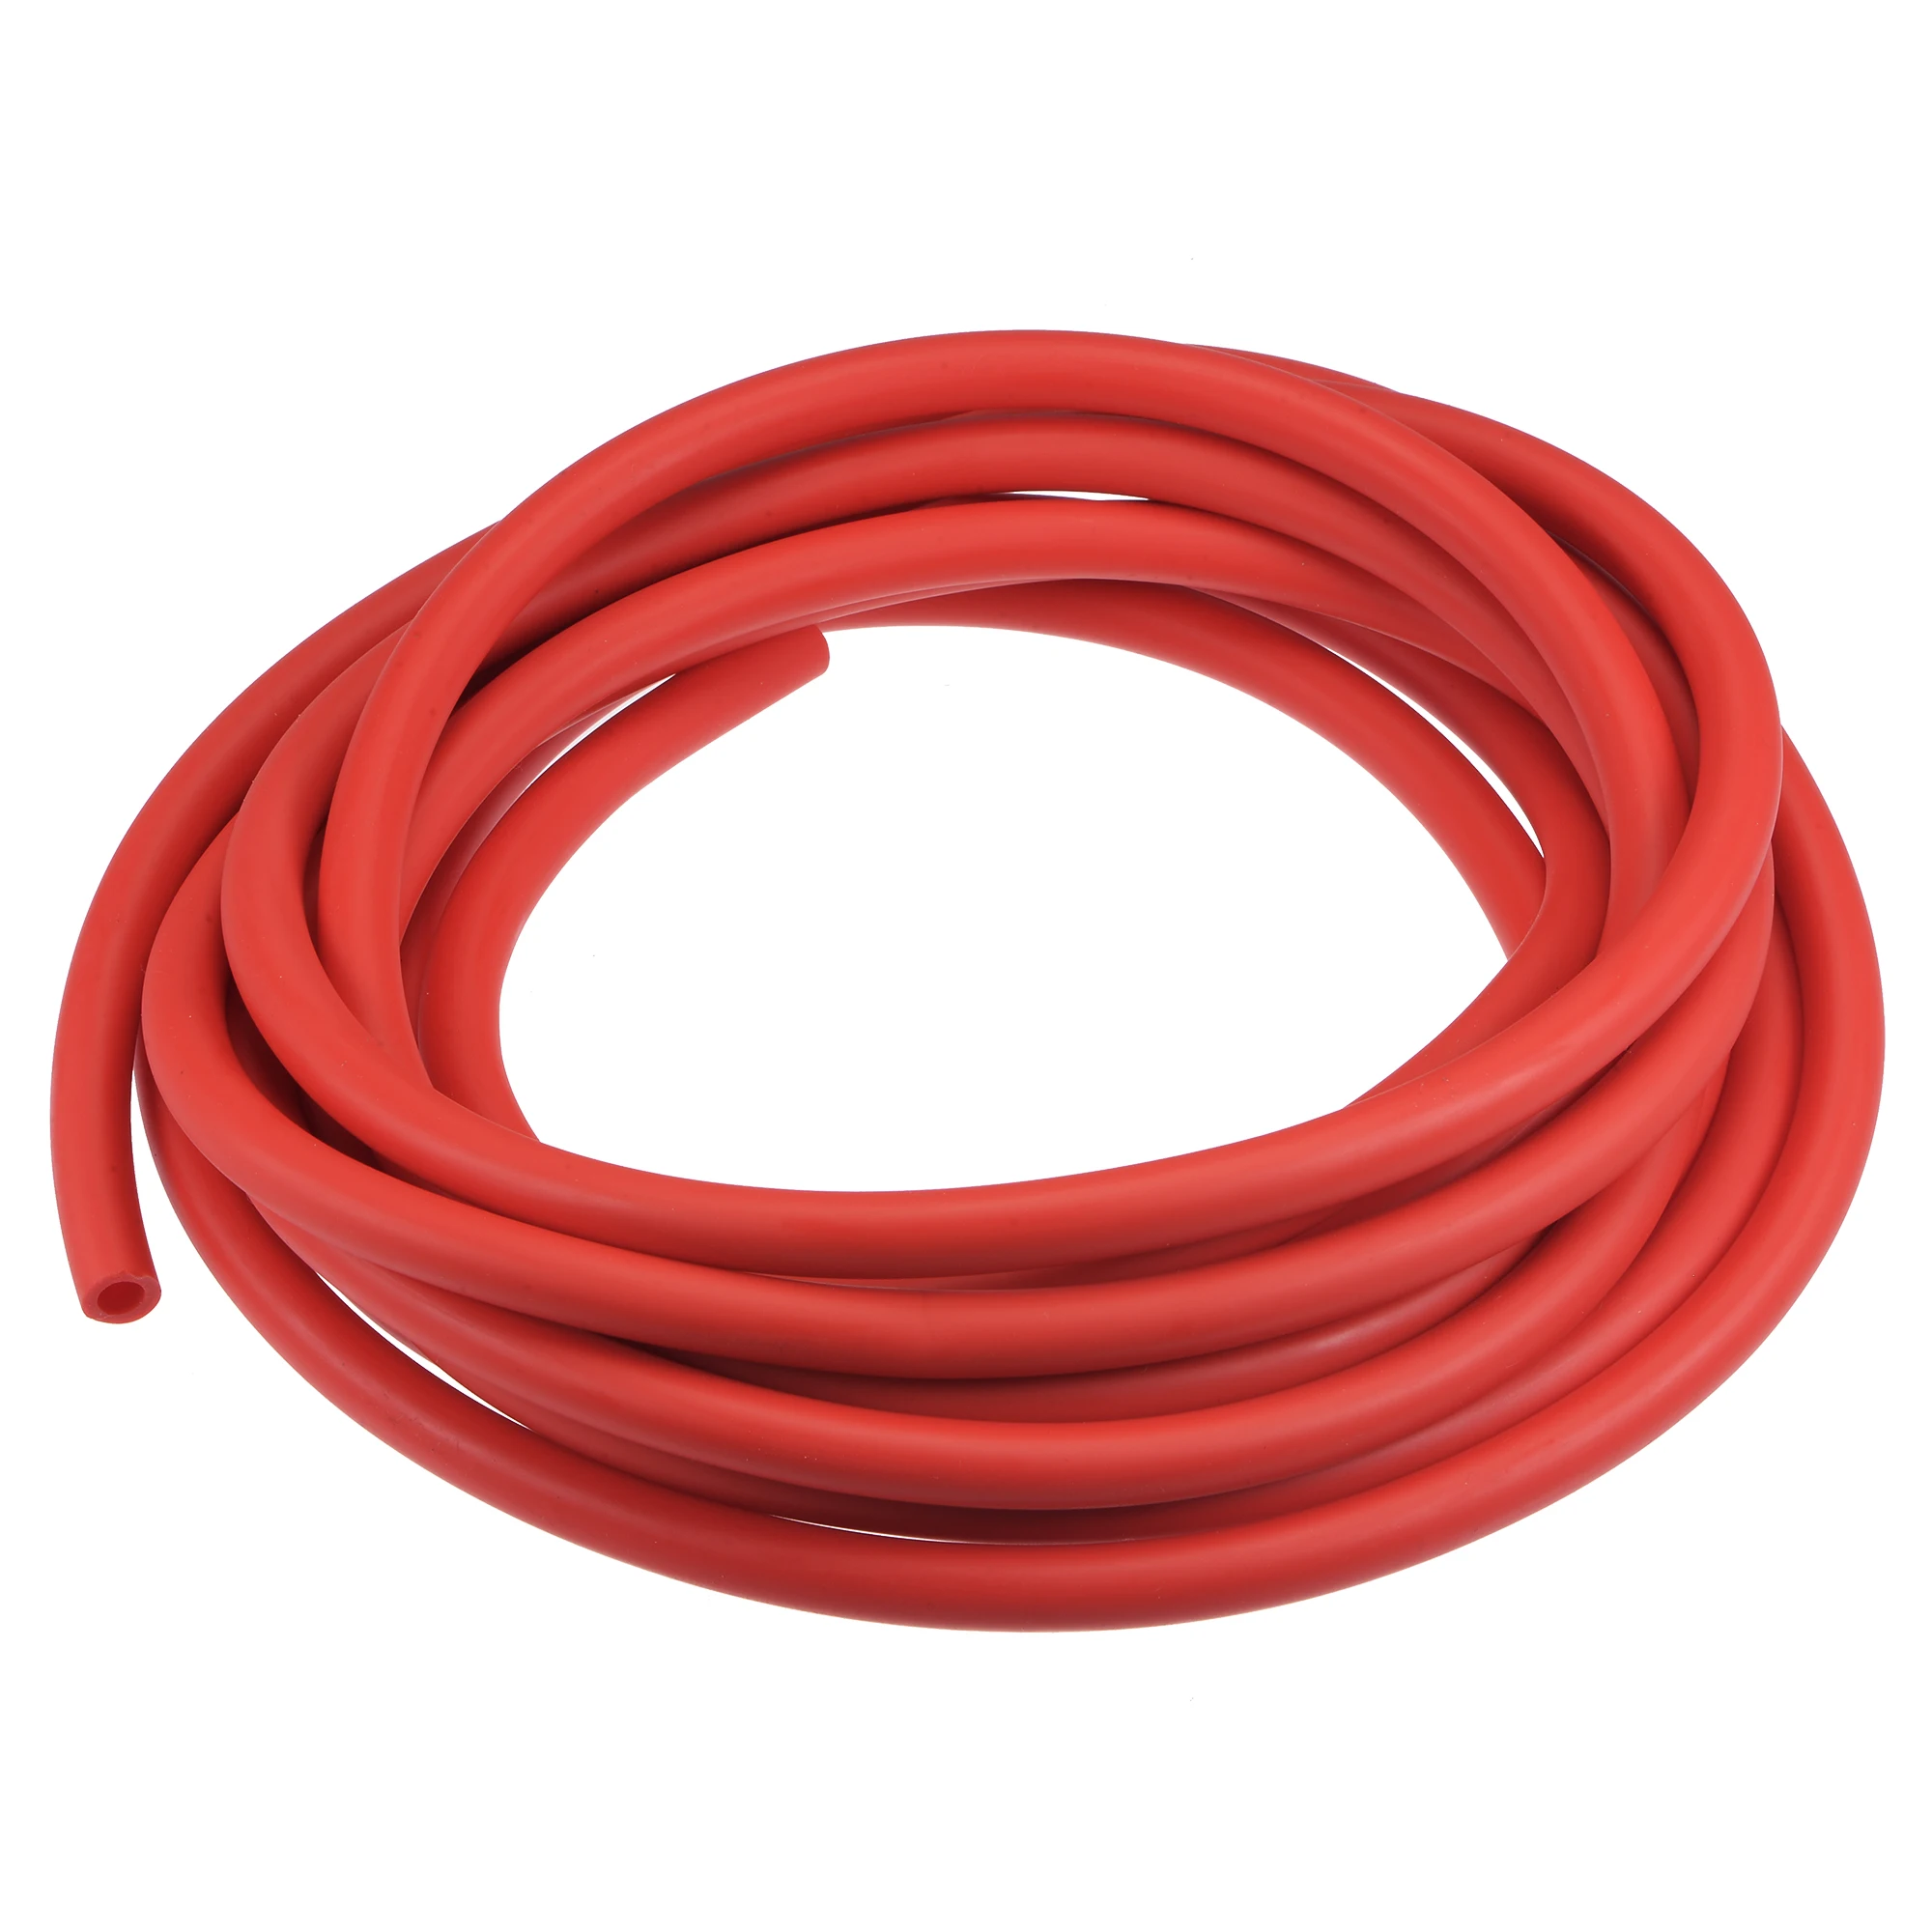 

Uxcell Latex Tubing 1/4-inch ID 3/8-inch OD 16ft Elastic Rubber Hose Red